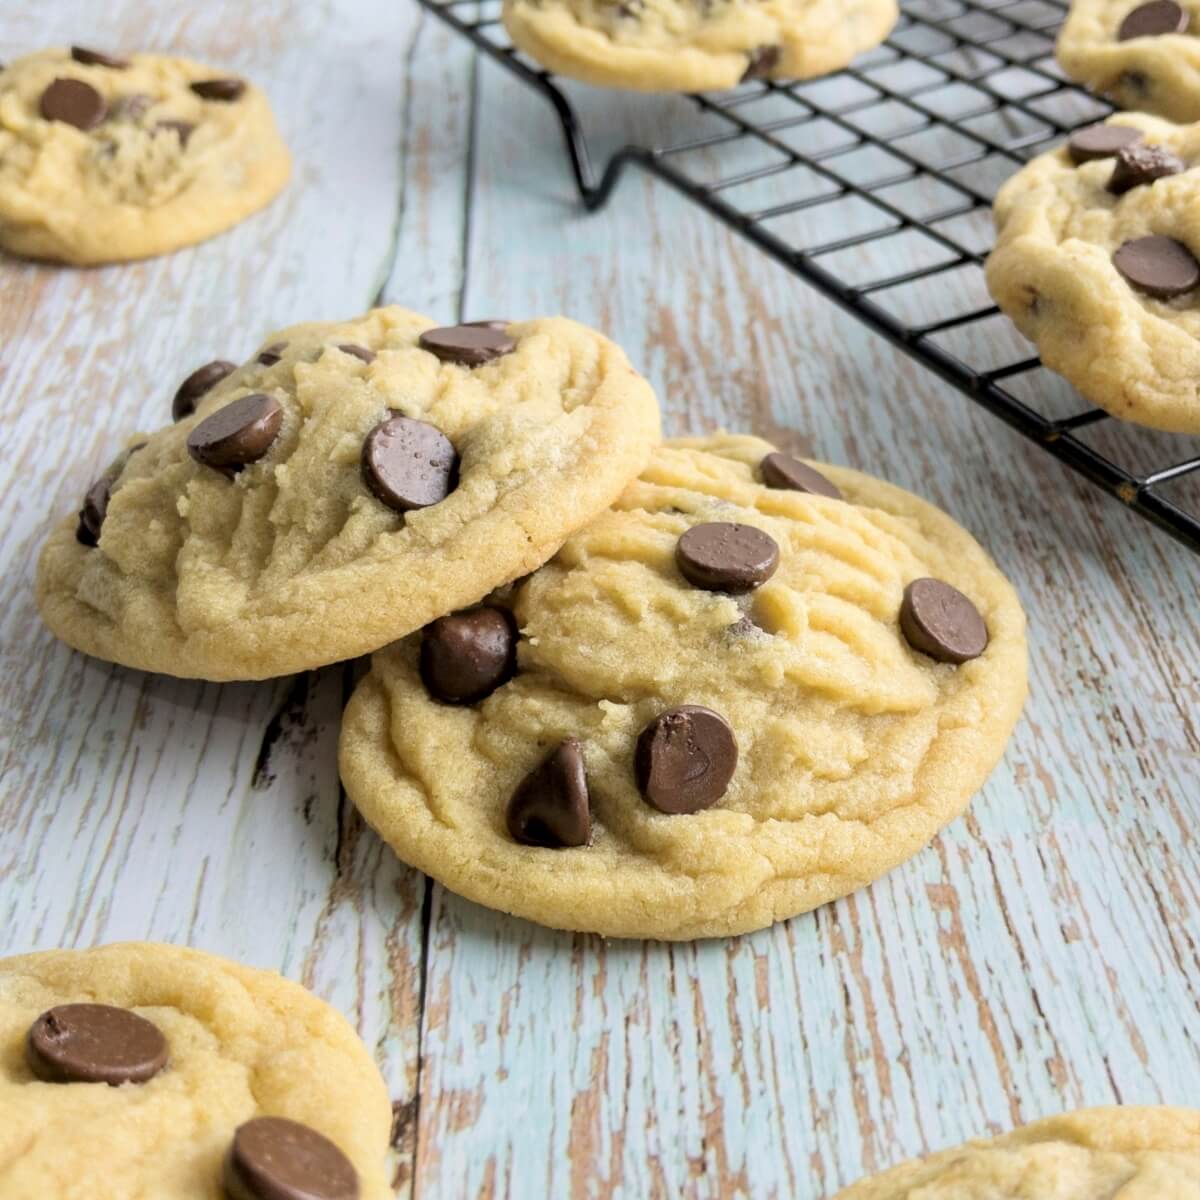 https://amycakesbakes.com/wp-content/uploads/2022/06/soft-bakery-style-chocolate-chip-cookies.jpg